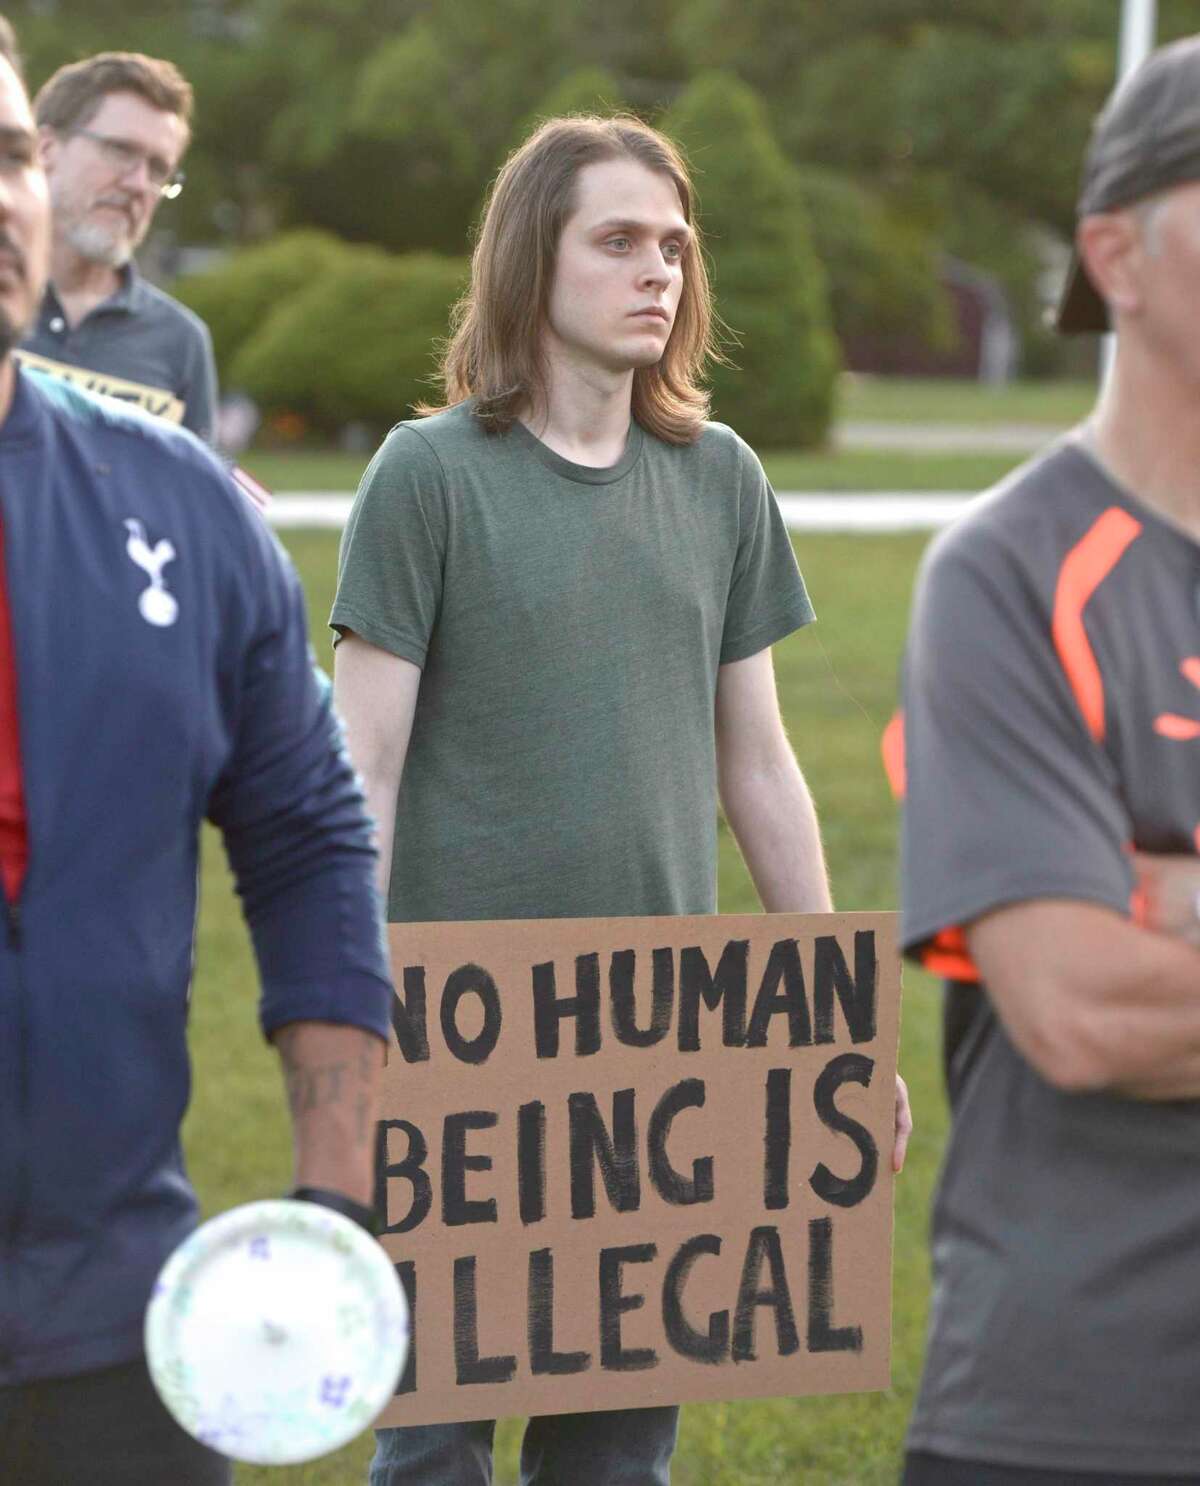 Ernie Johnson, of Bethel, listens to a speech at the "Light for Liberty:A Vigil to End Human Detention Camps" vigil held in Bethel and across the world. Friday evening. Friday, July 12, 2019, in Bethel, Conn.